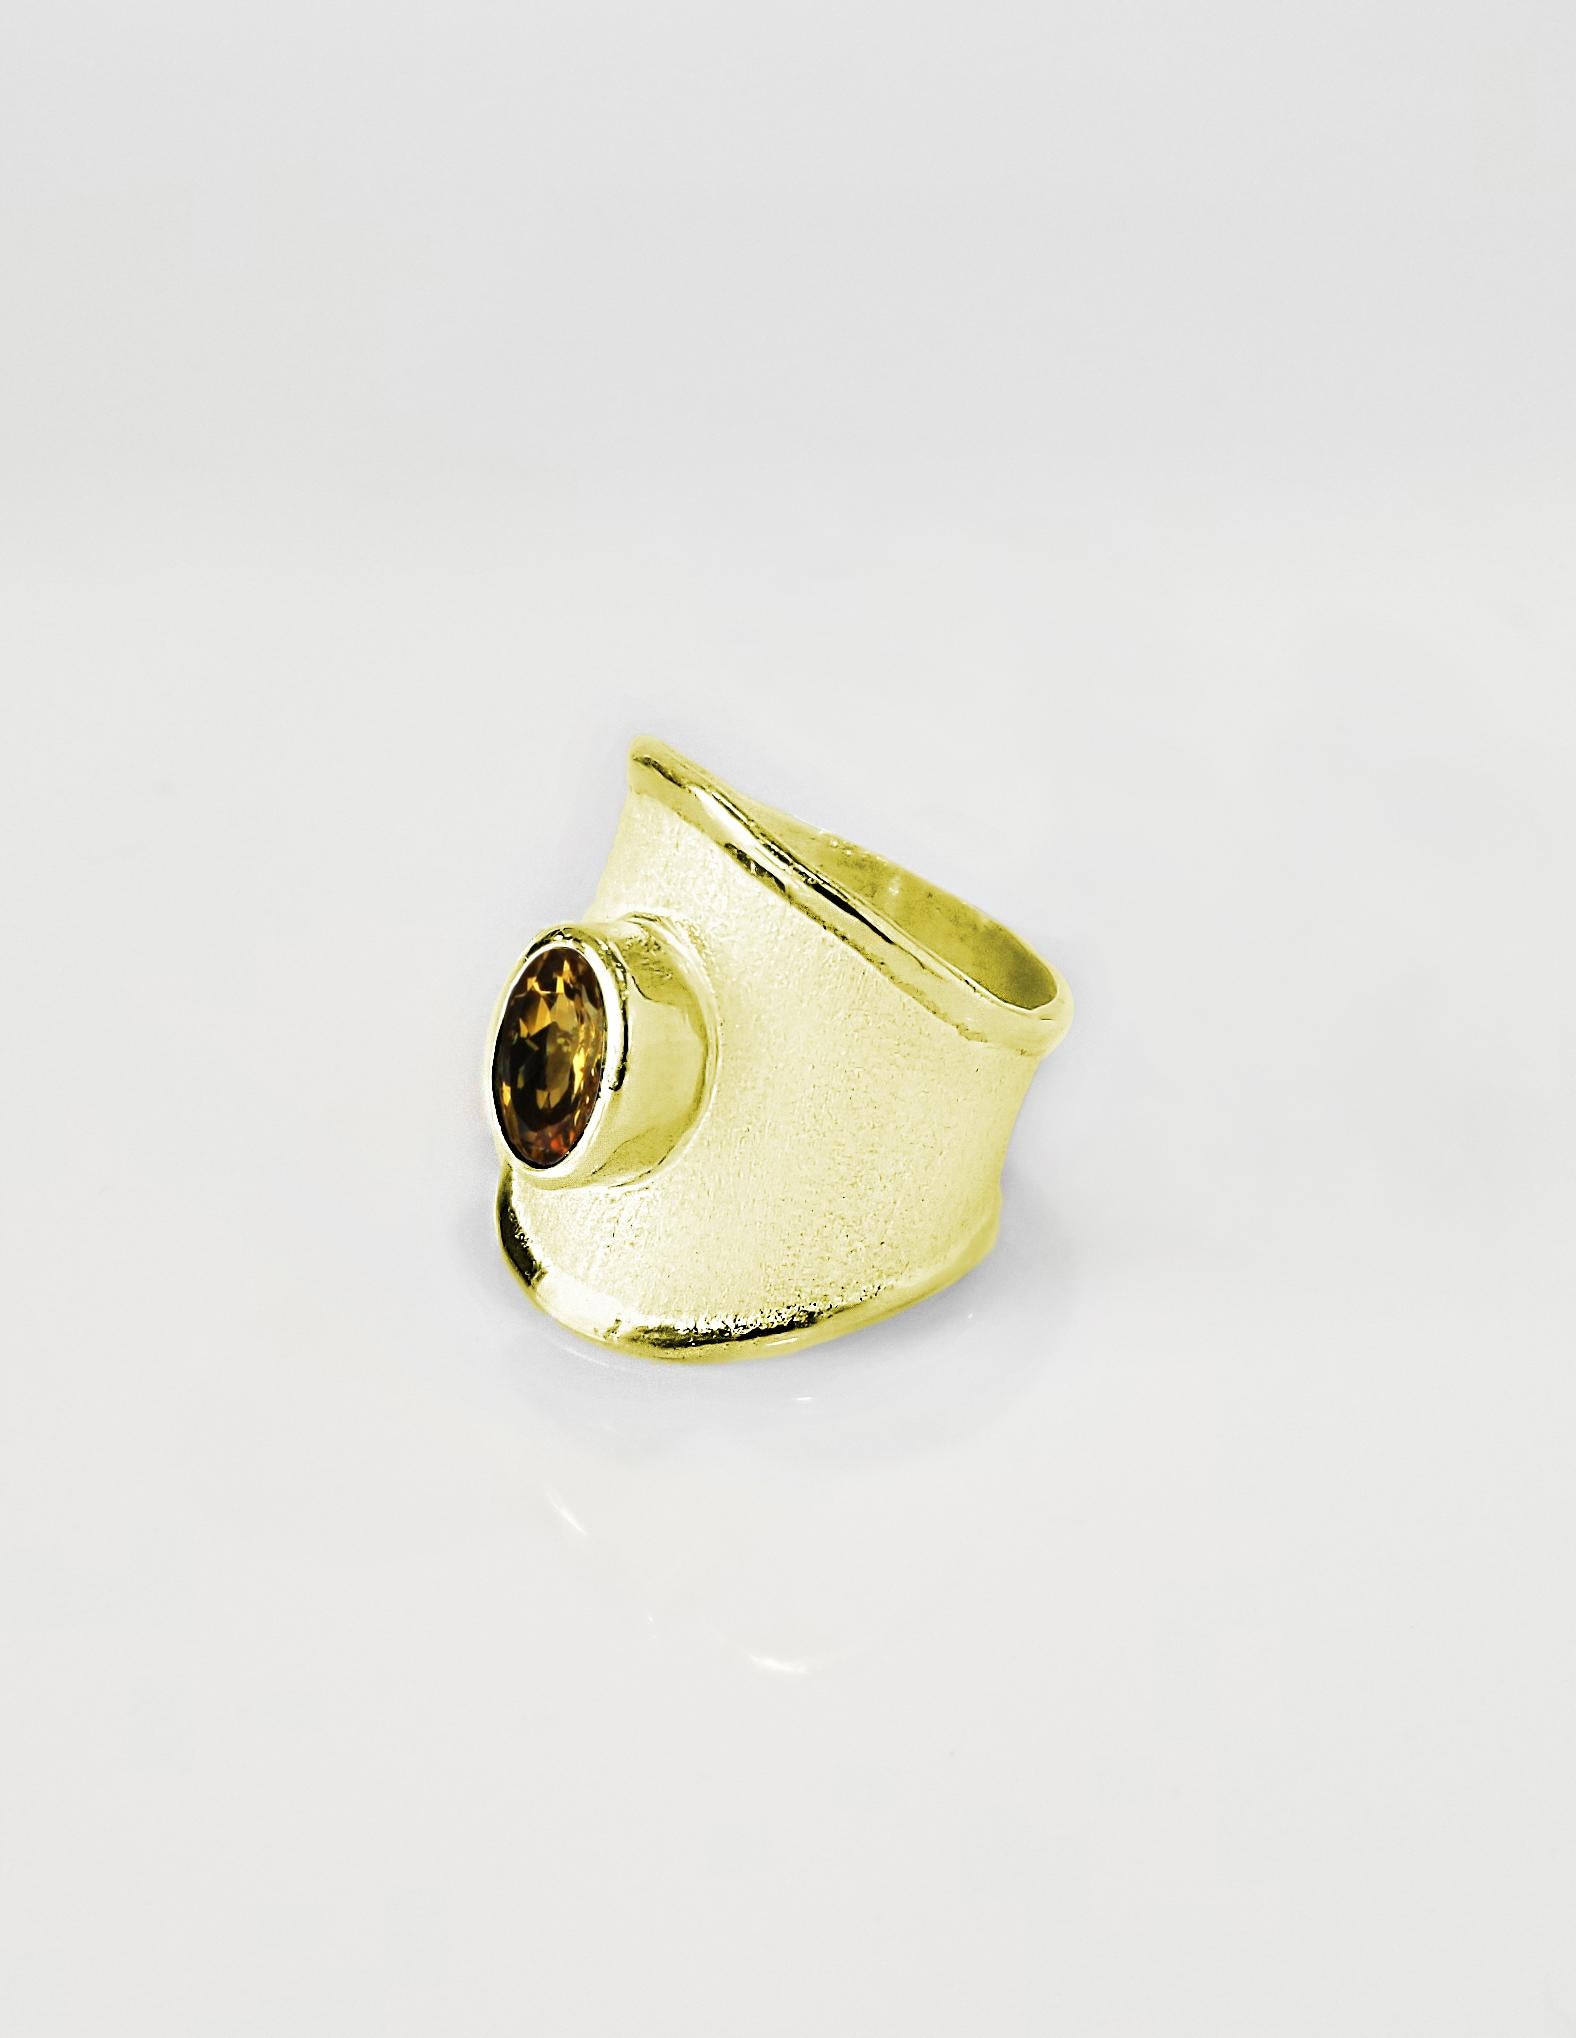 Women's or Men's Yianni Creations 18 Karat Yellow Gold Wide Band Ring with a Oval Citrine